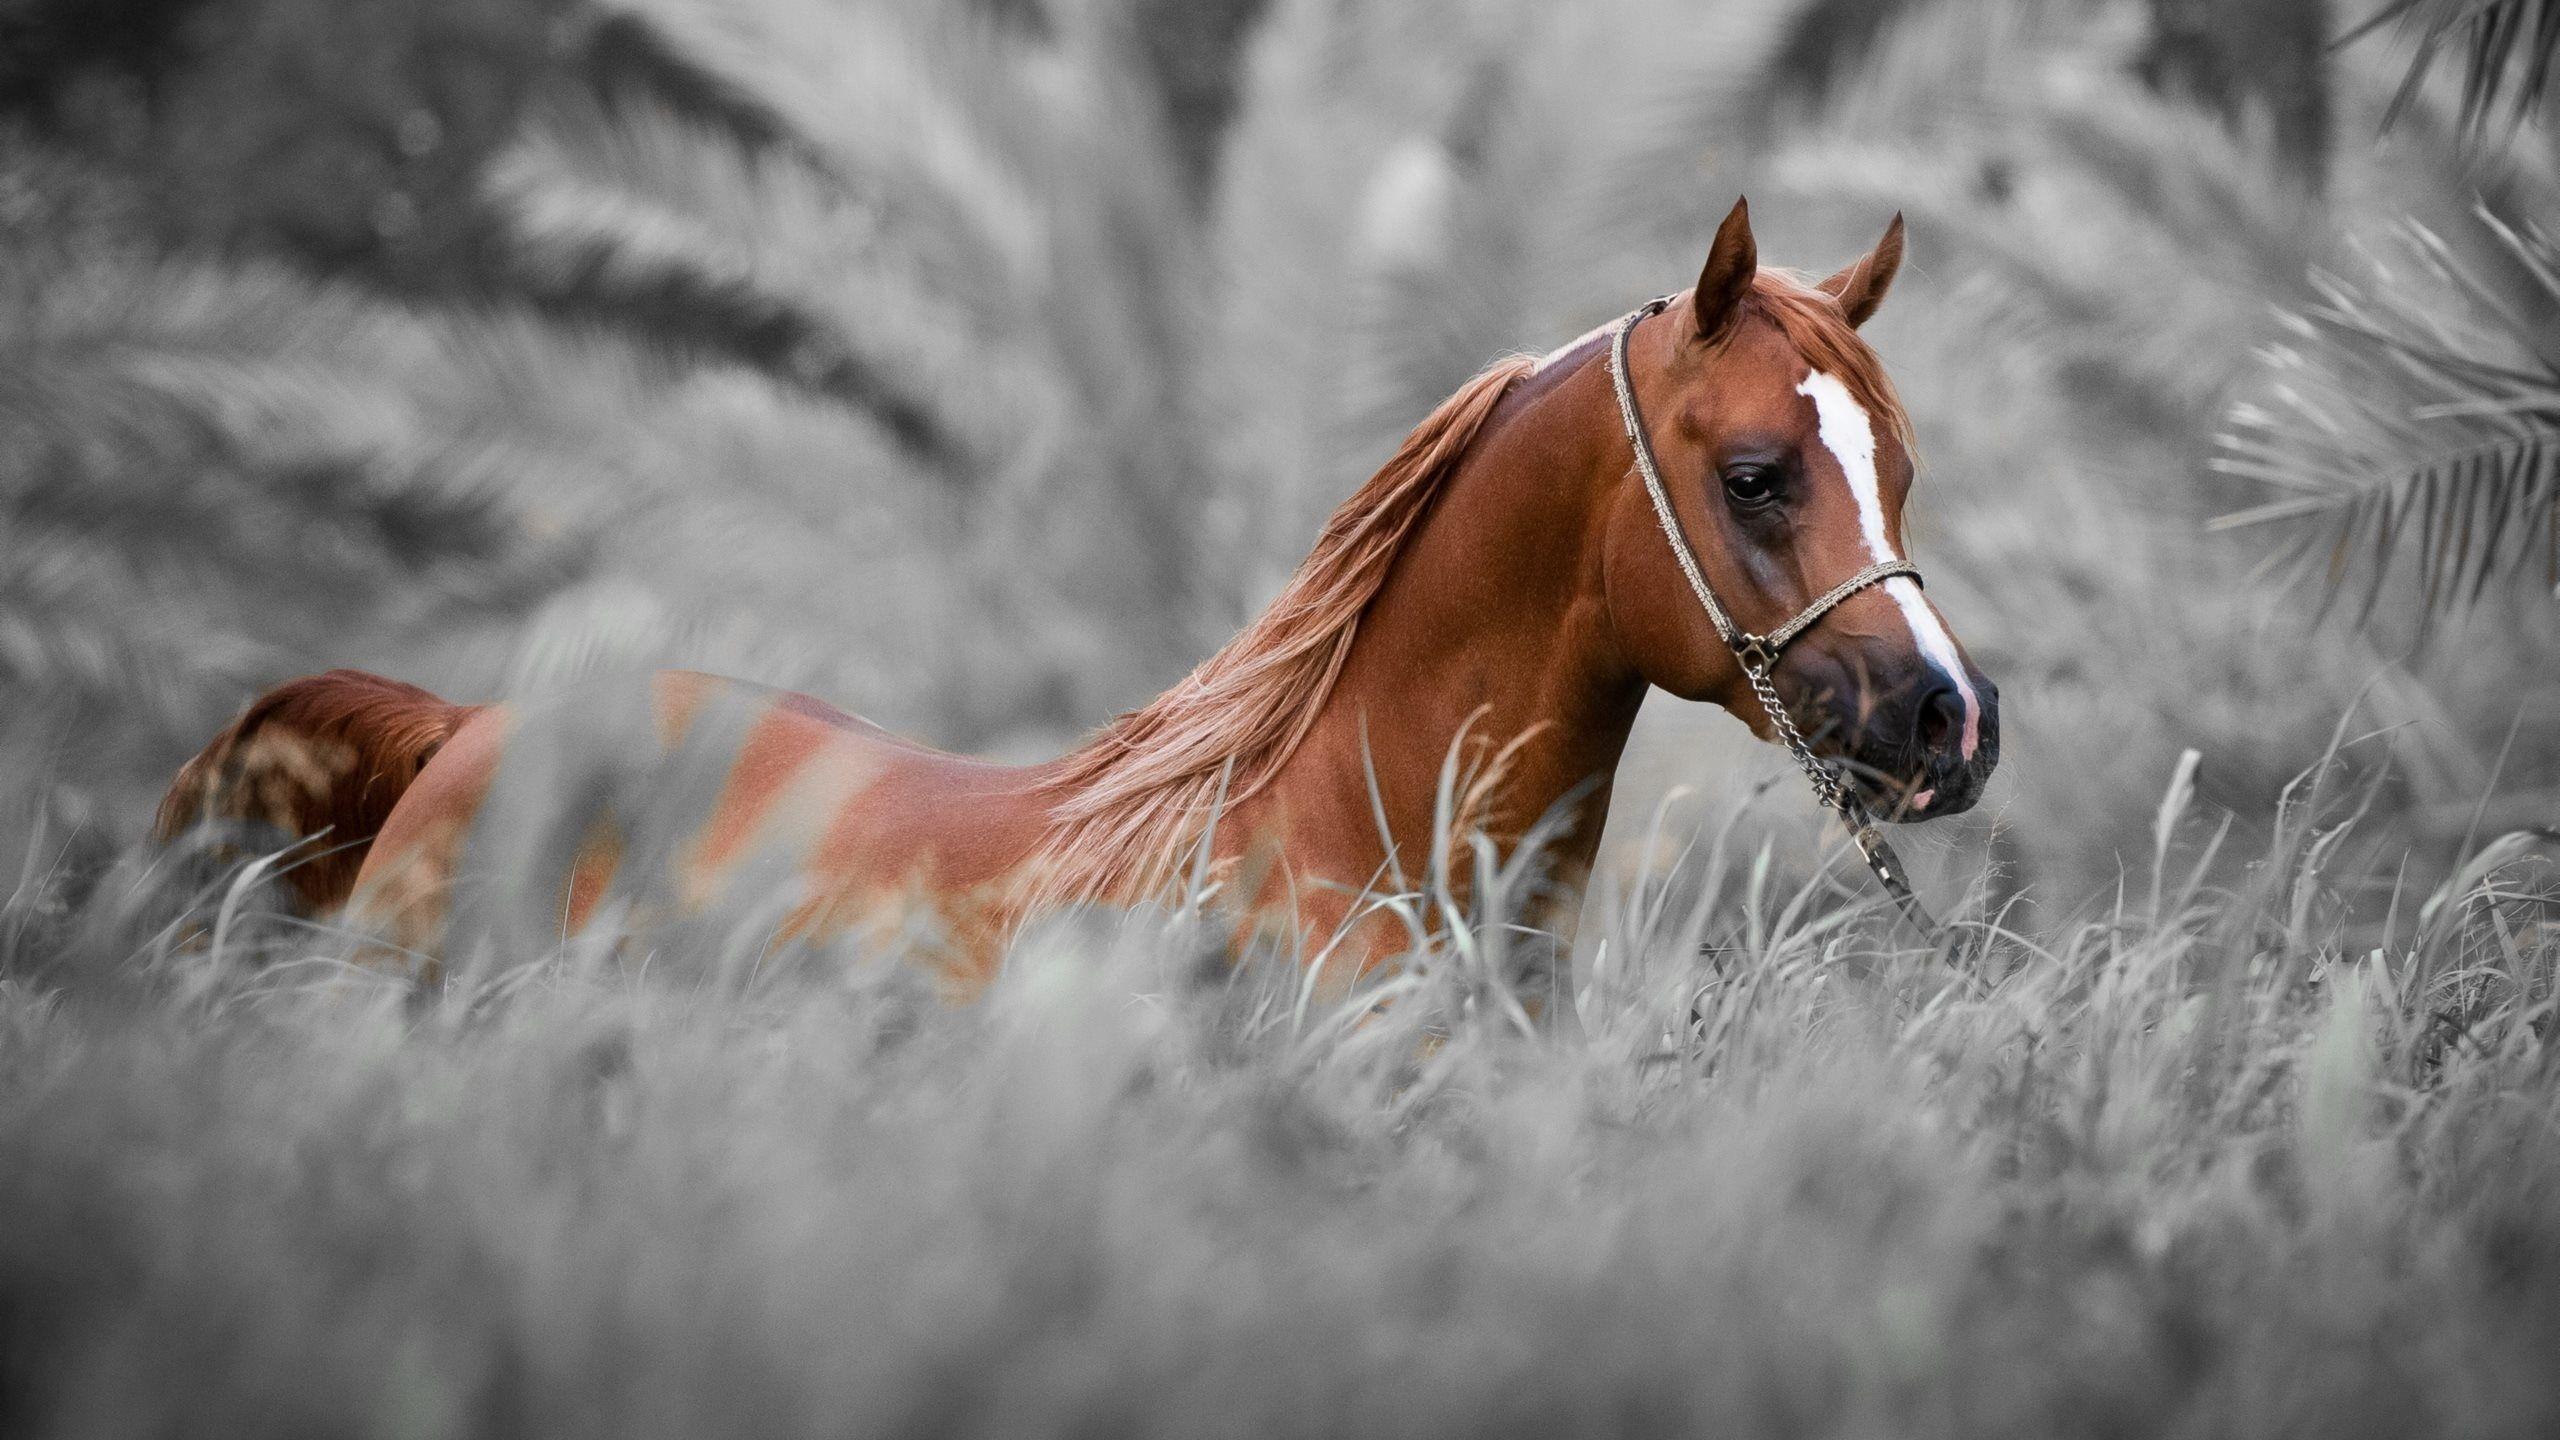 Horse Wallpaper For Windows #nVm. Animals in 2019